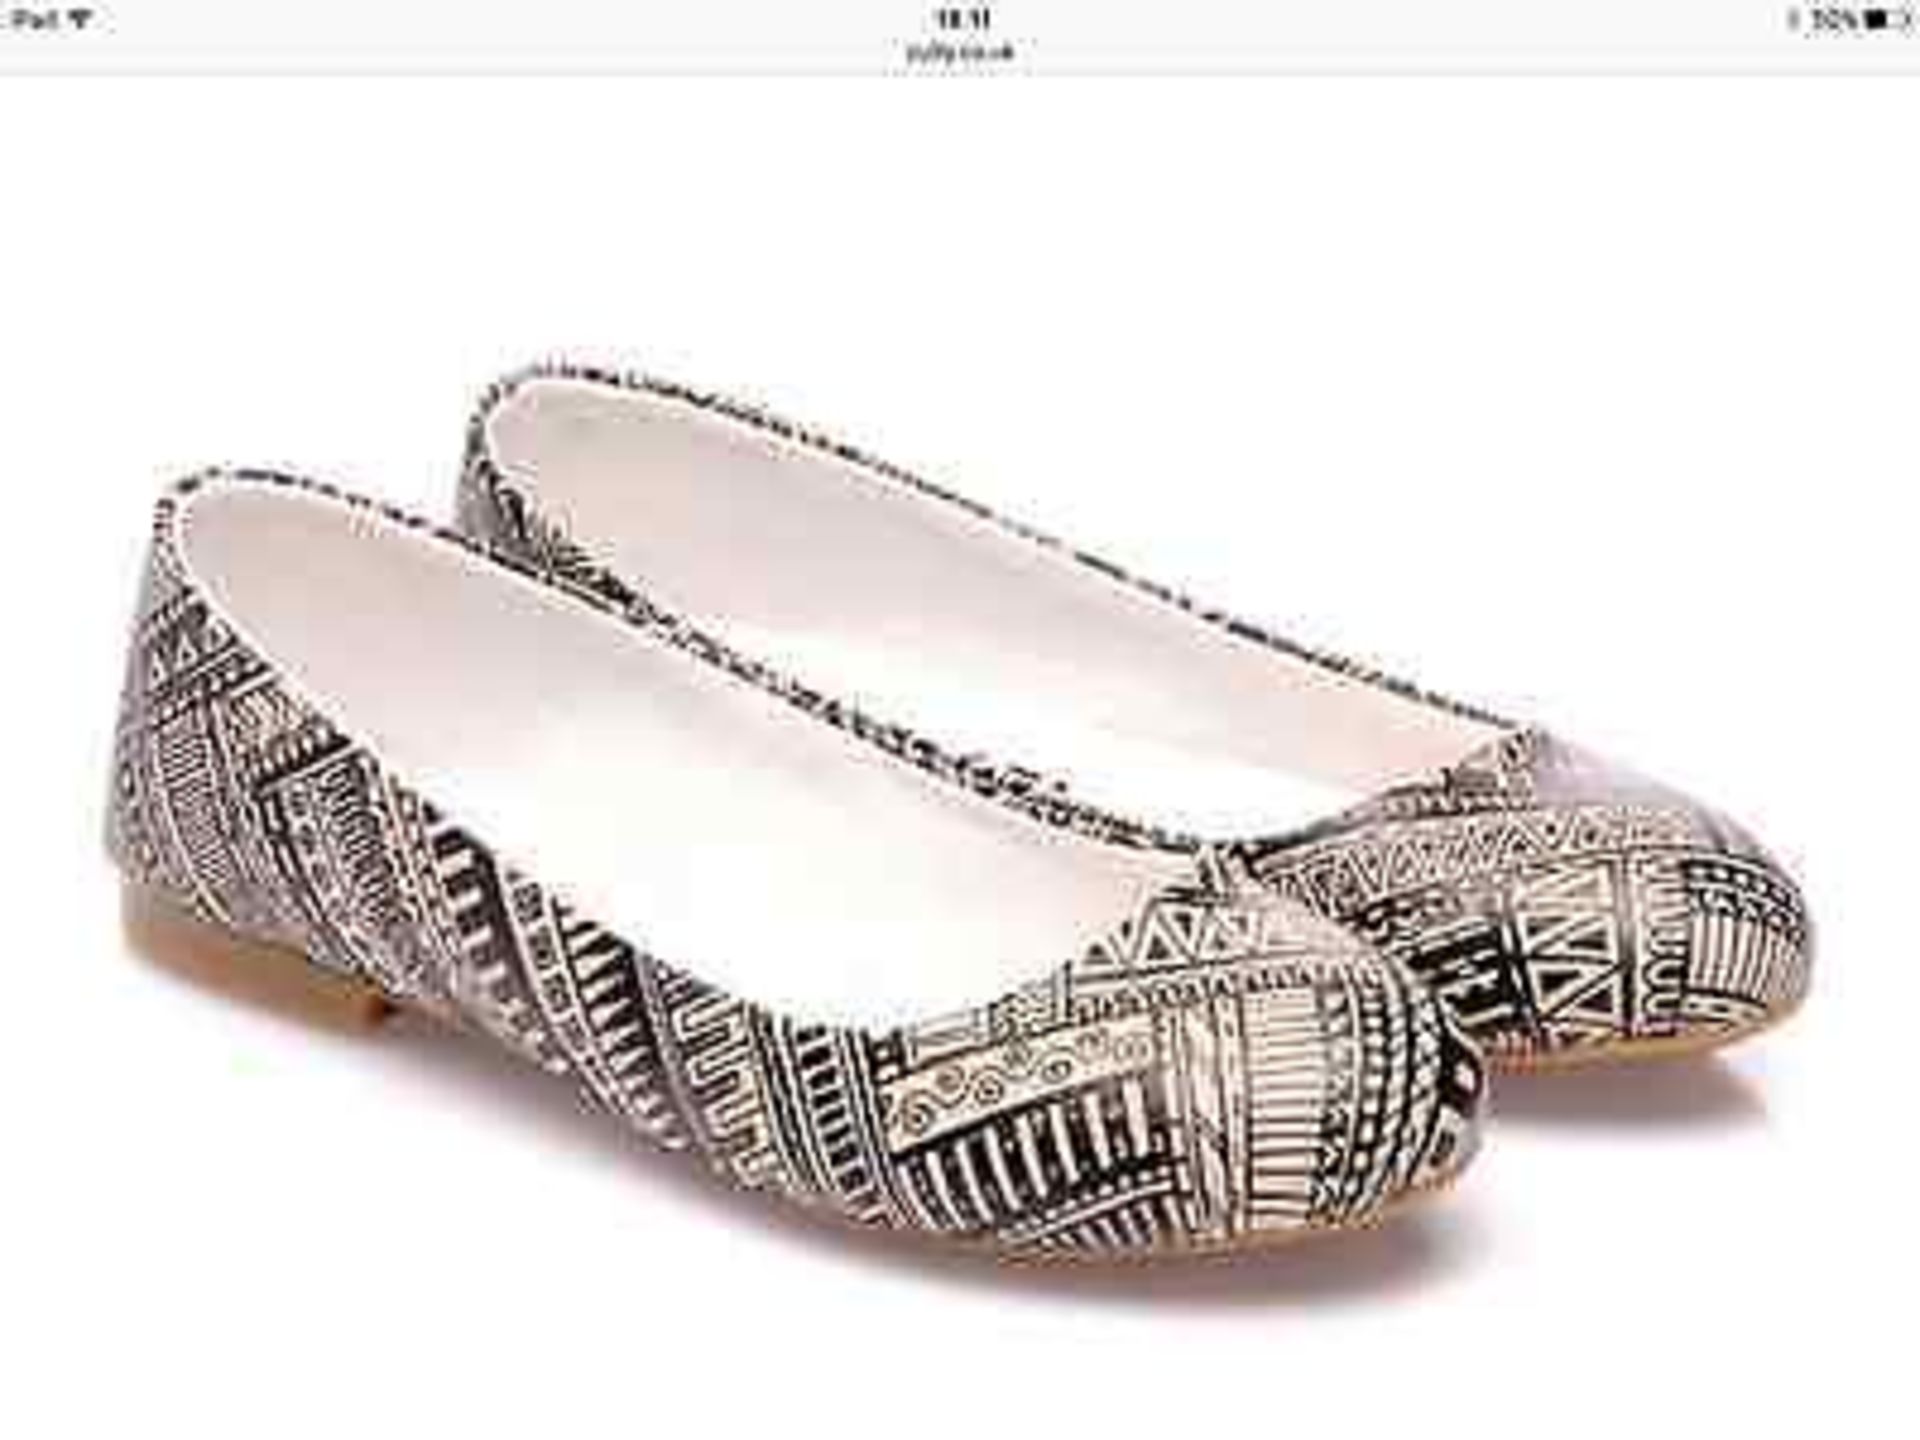 Streetfly Black & White Abstract Ballet Flat, Size UUe 41, RRP £112.99 (New with box) - Image 2 of 4